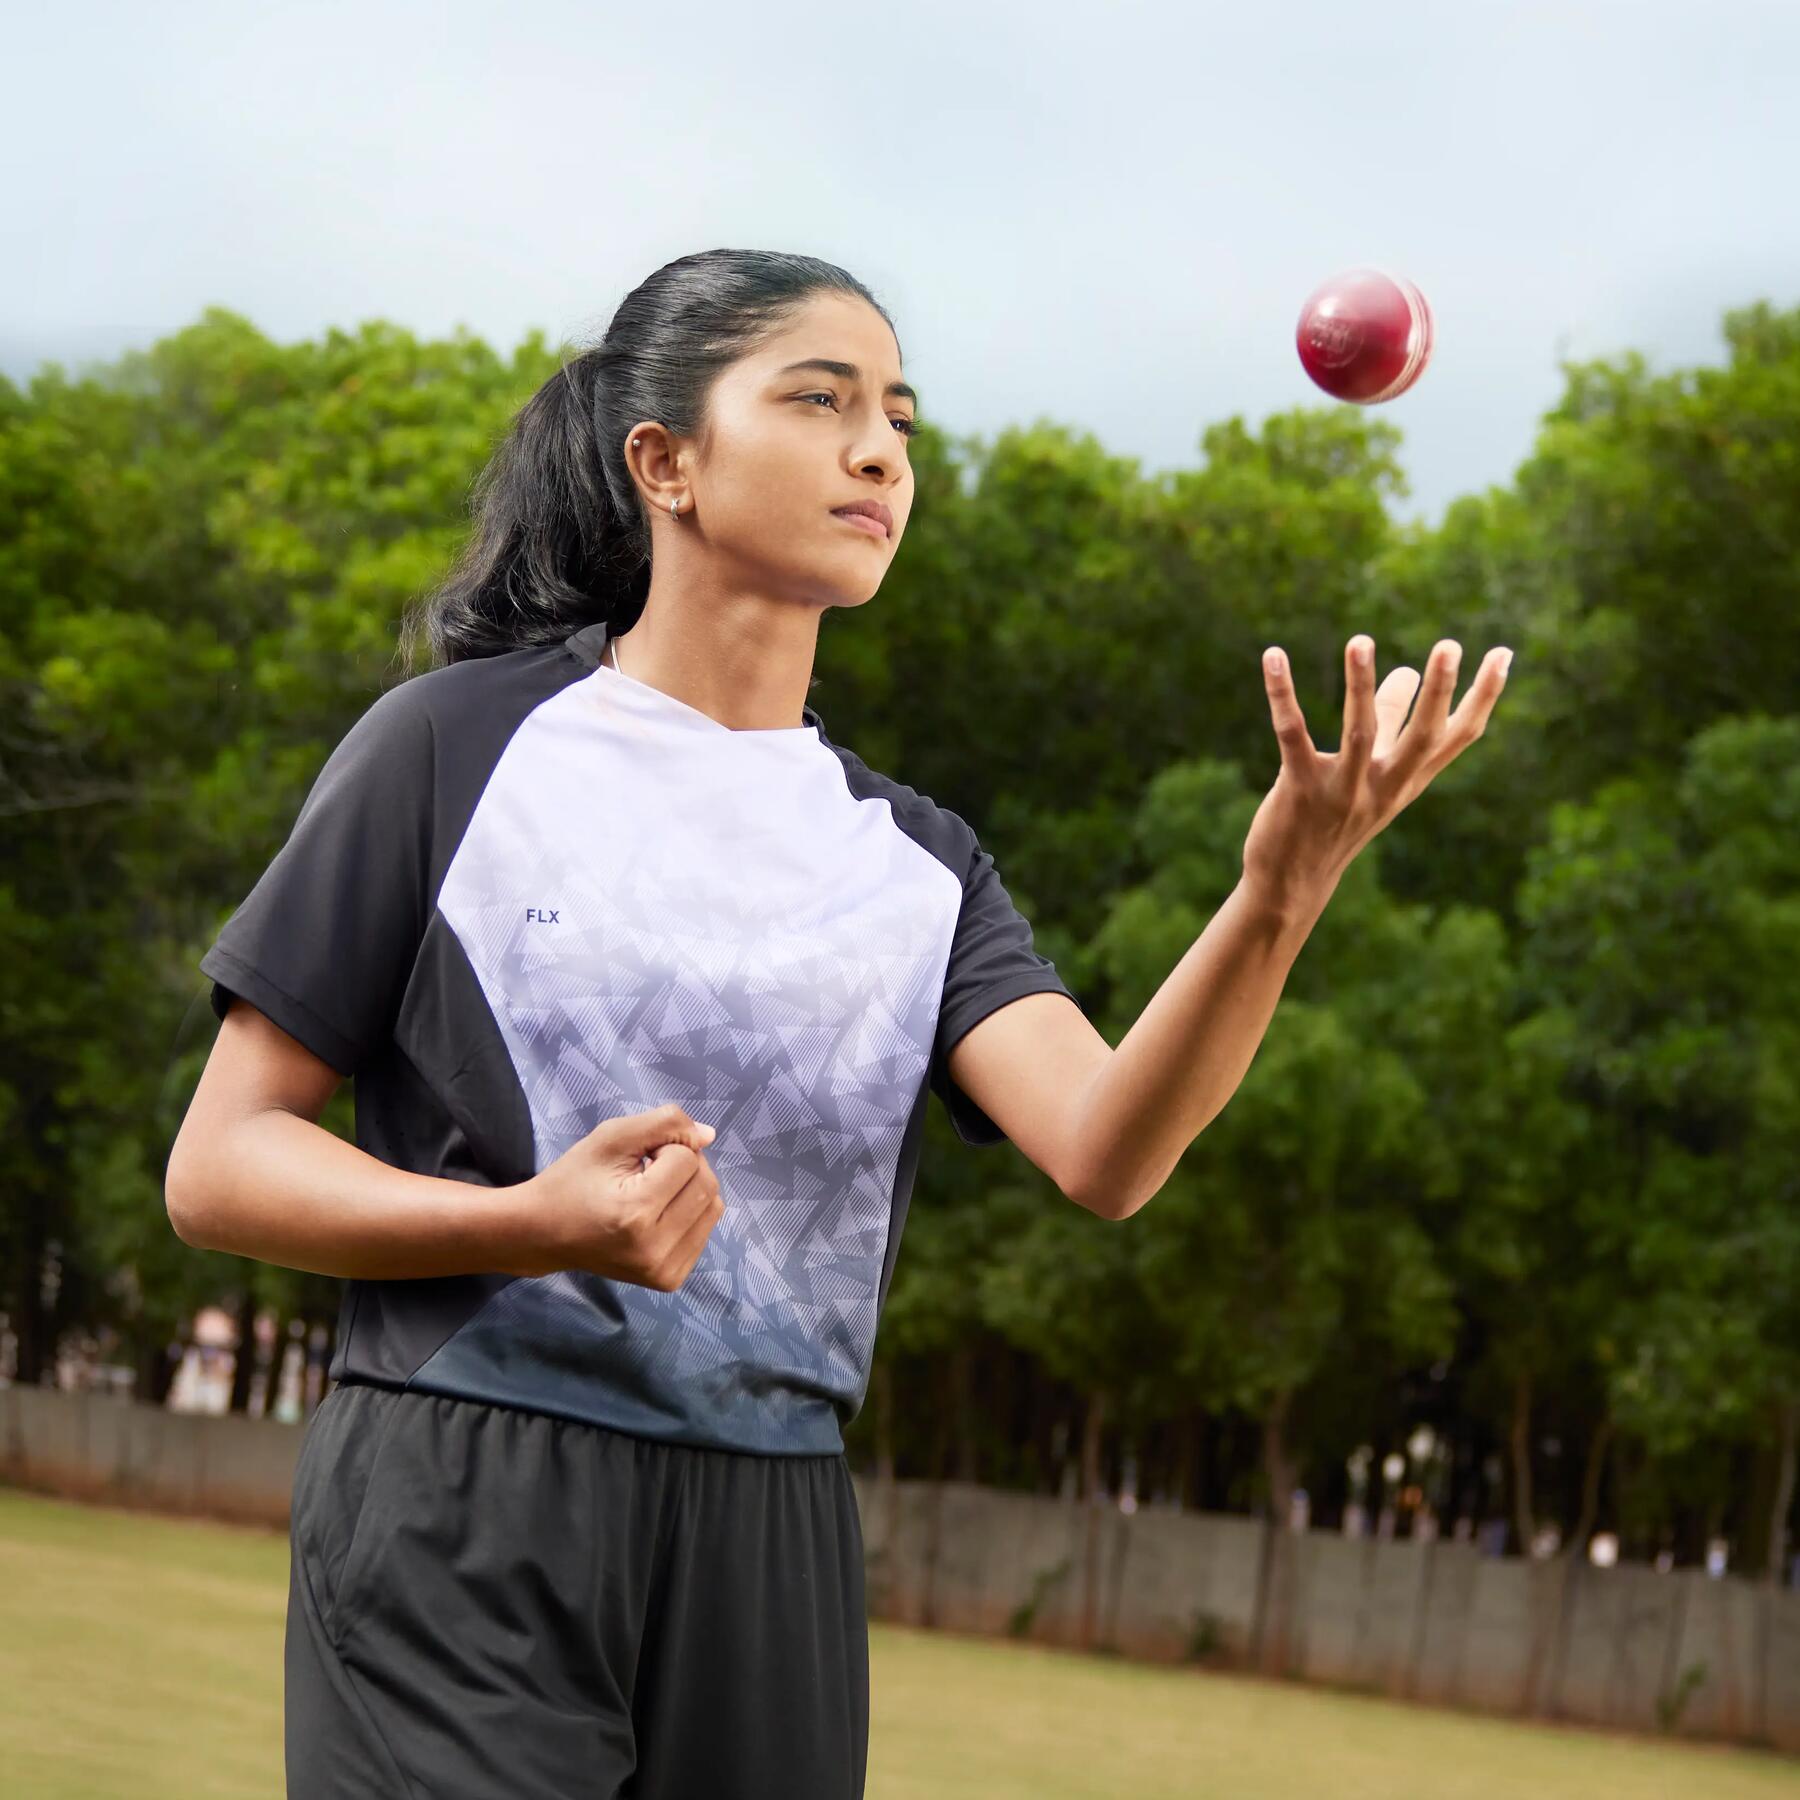 Girl throwing cricket ball up in the air